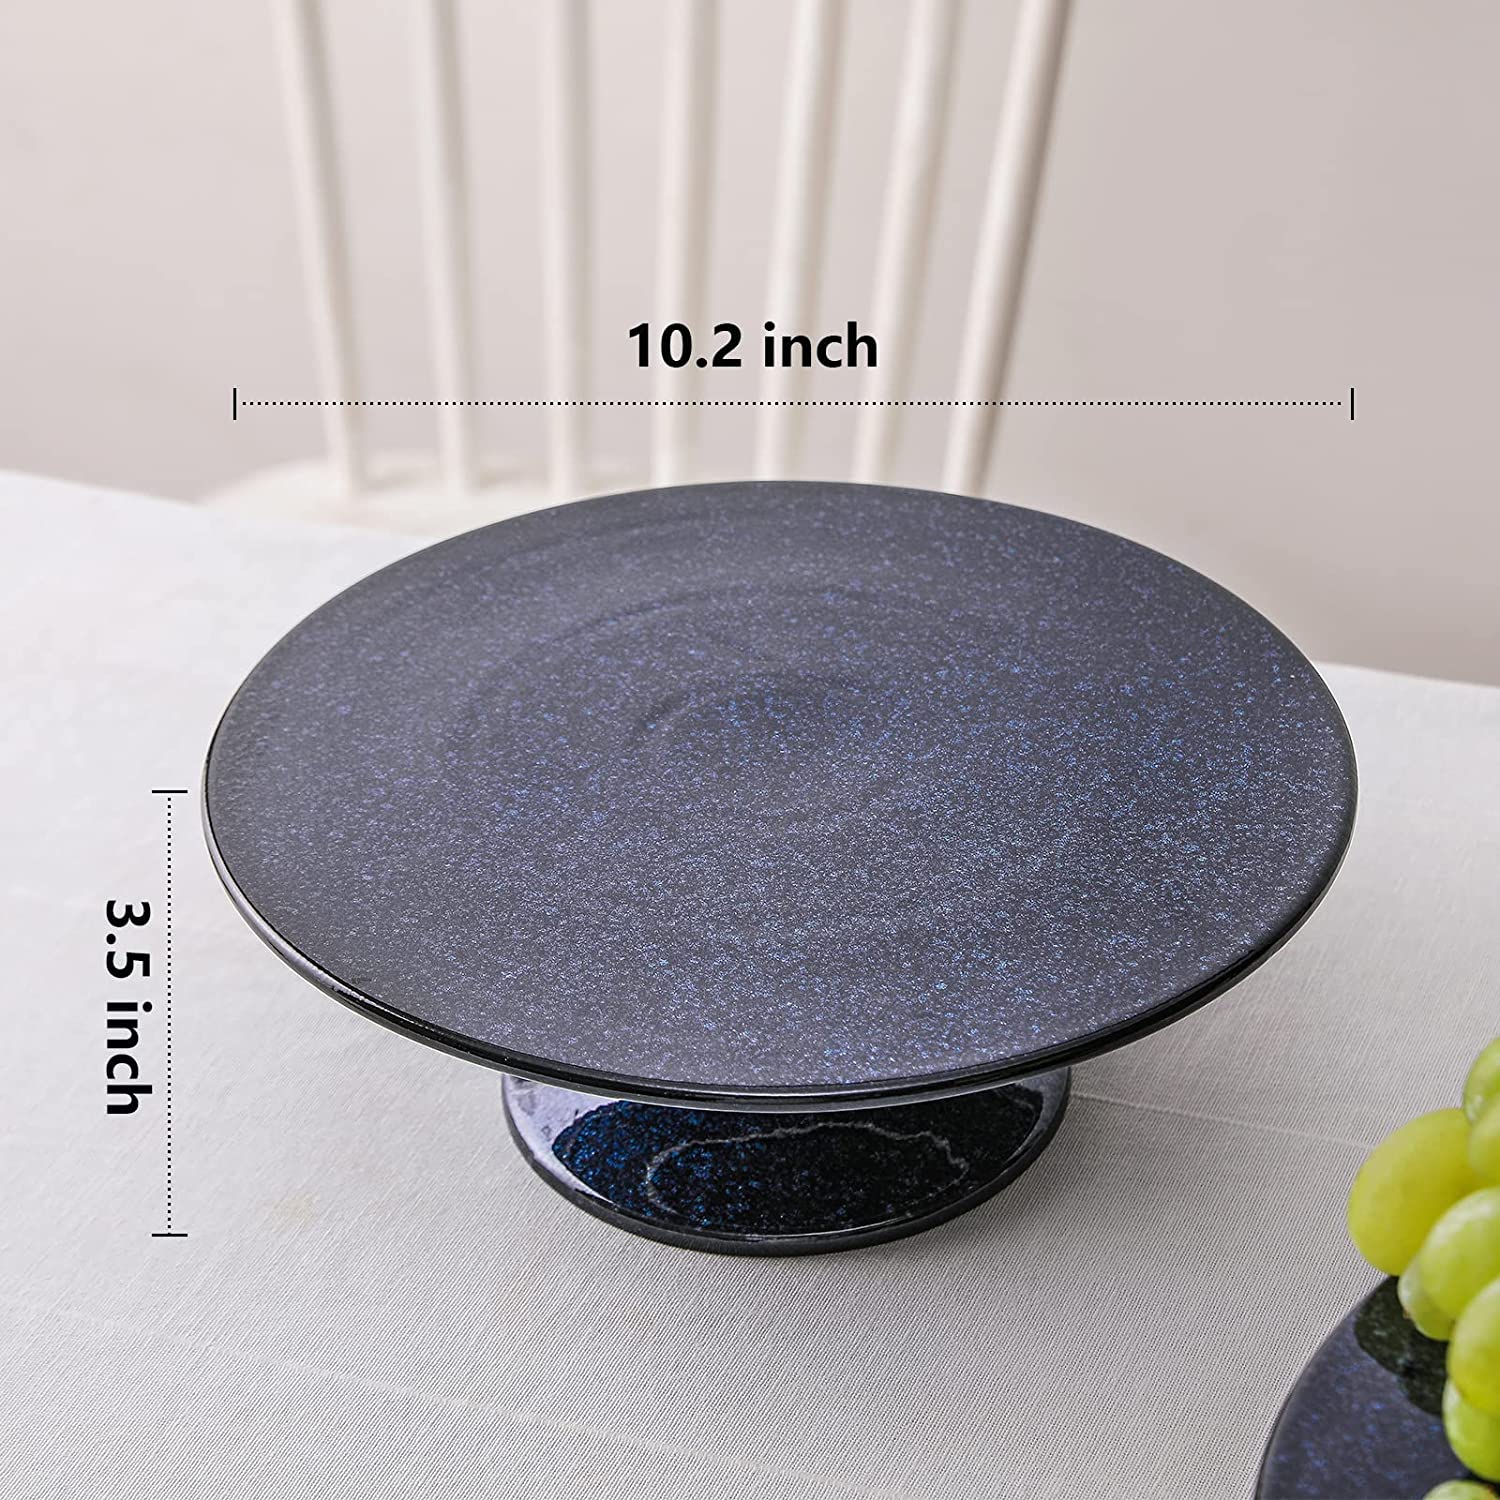 Vicrays Ceramic Round Cake Stand Porcelain 10 Inch Pedestal Pastry Serving Tray for Snacks Desserts Cookies Cupcakes Ideal for Birthdays Easter - 6